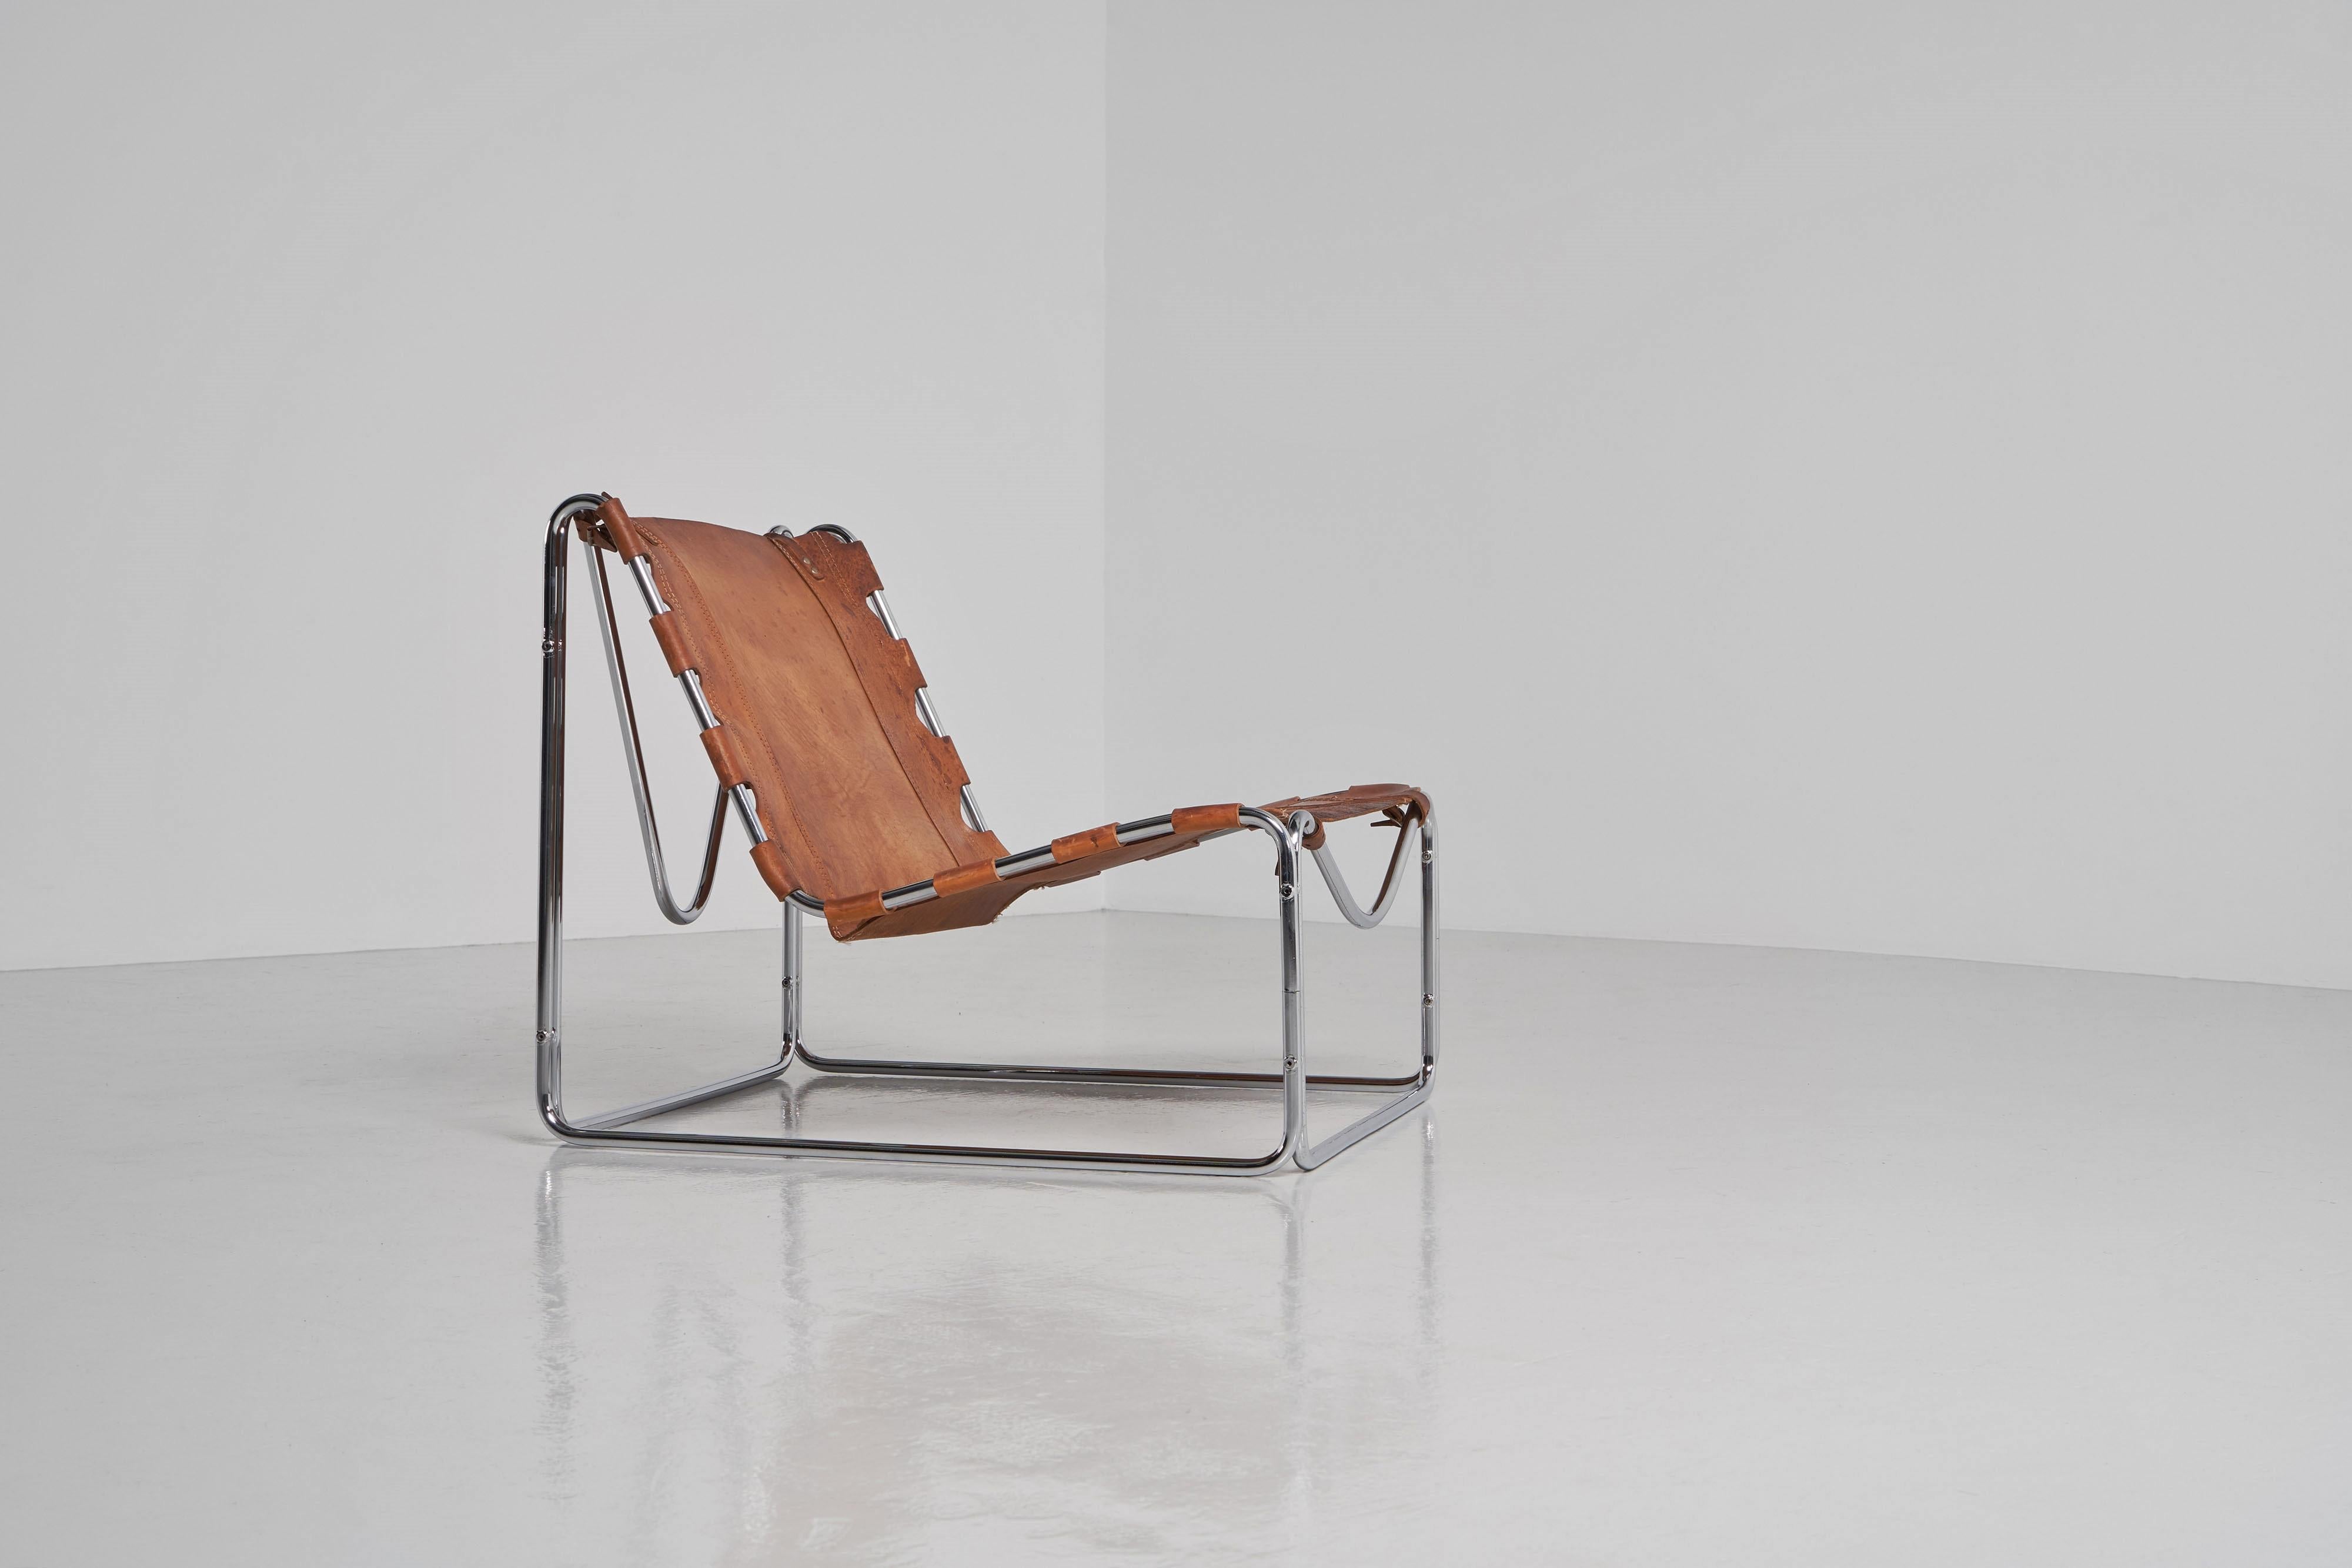 Wonderful Fabio lounge chair, designed by Pascal Mourgue and manufactured by Steiner in France in 1970. This remarkable chair showcases a captivating shape and is crafted from chrome-plated tubular metal, exuding a sleek and modern aesthetic. The